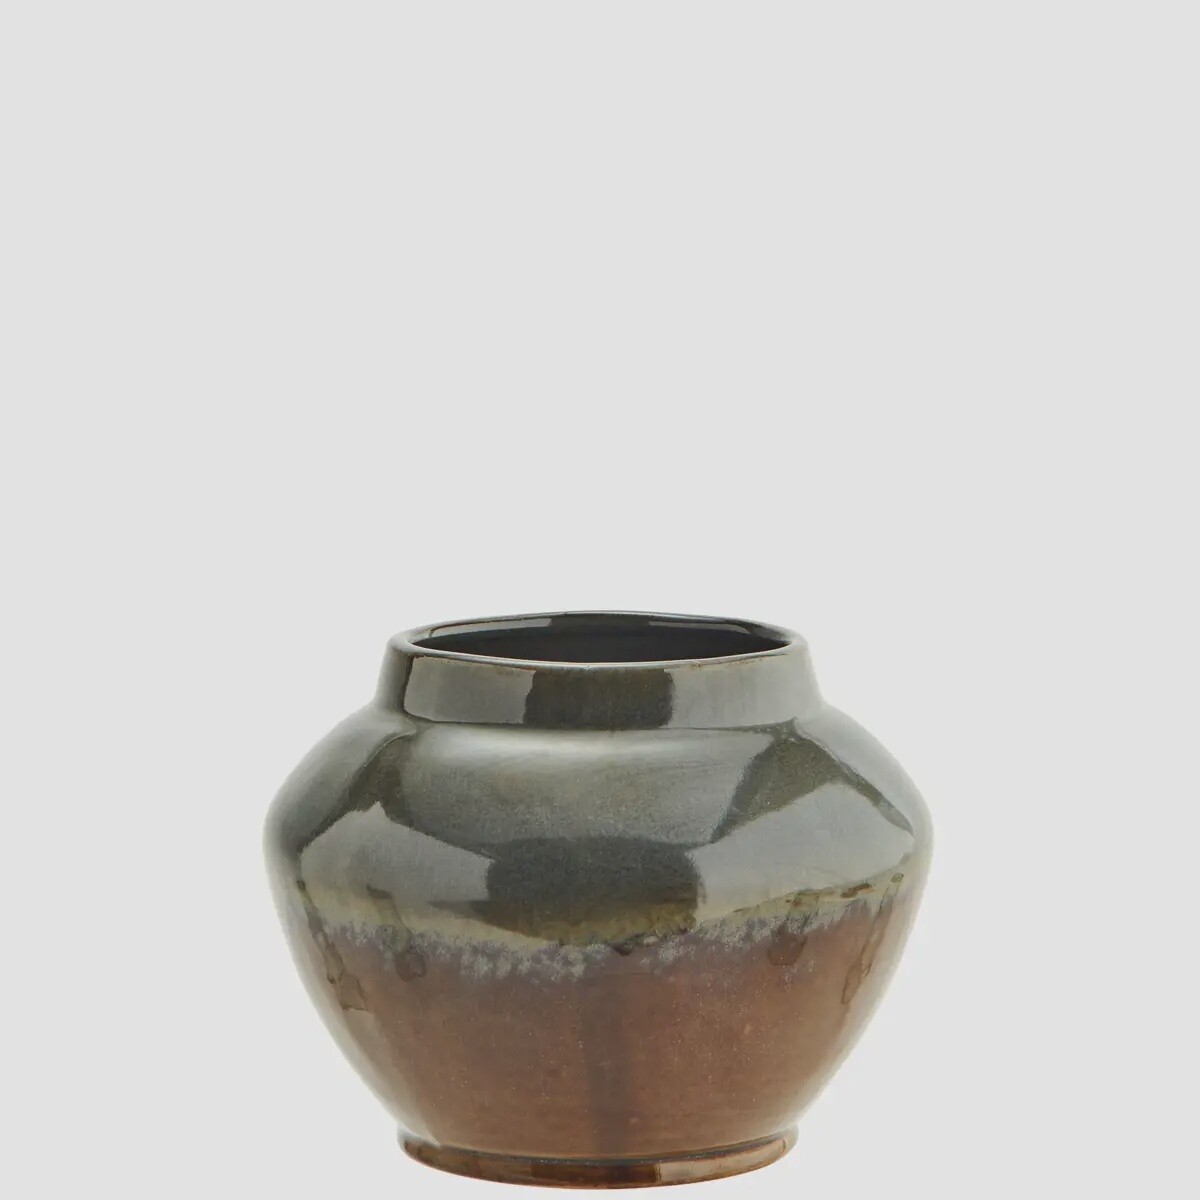 Stoneware Flower Pot, Colour: Grey/Taupe/Brown